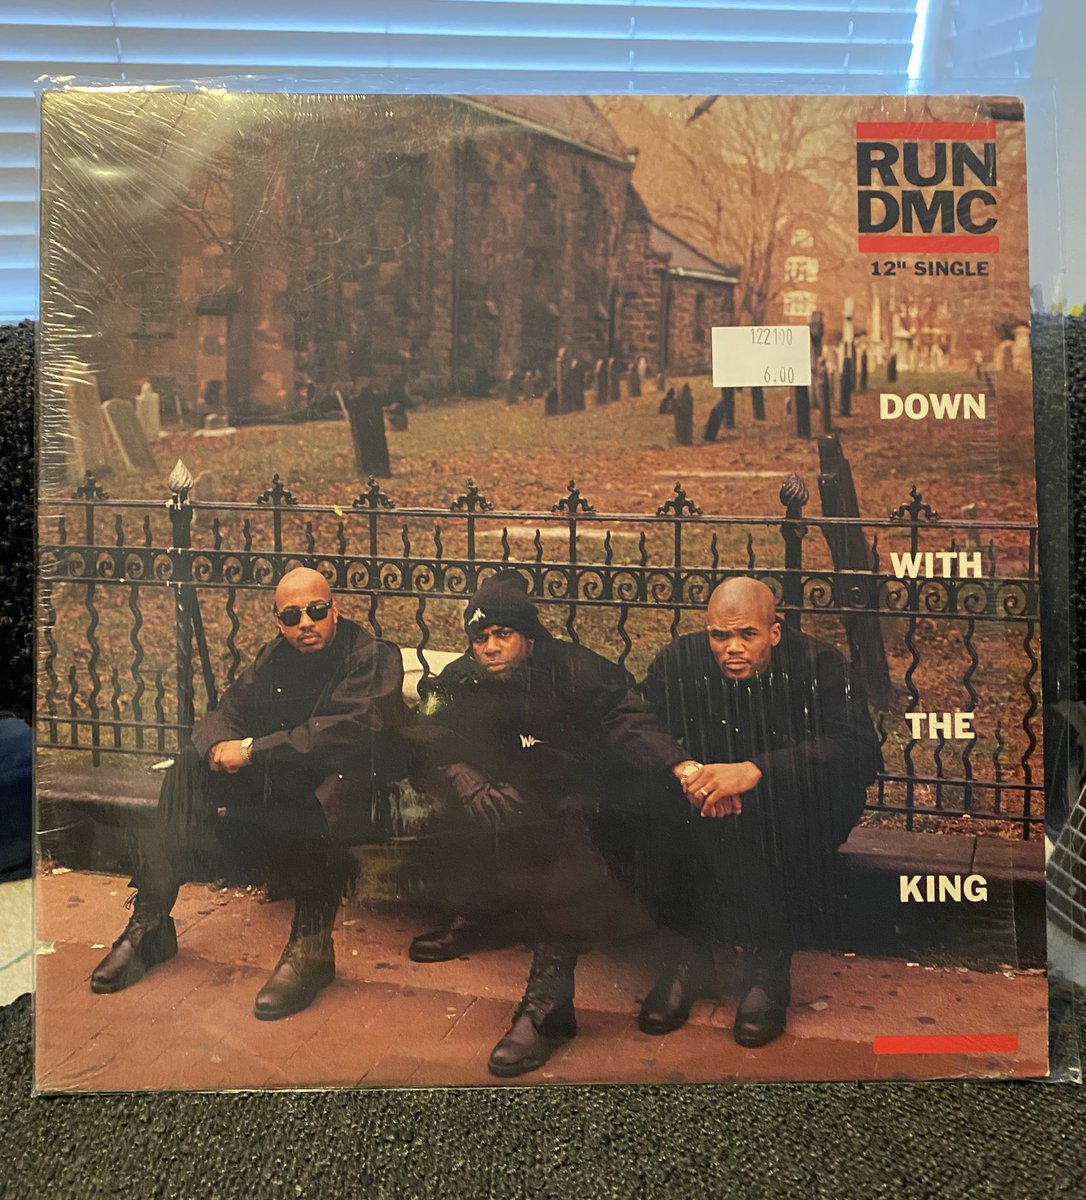 Man… respect to @PeteRock for giving RUN DMC a straight banger when the legends were starting to be counted out! Still one of my faves. #DownWithTheKing #HipHop